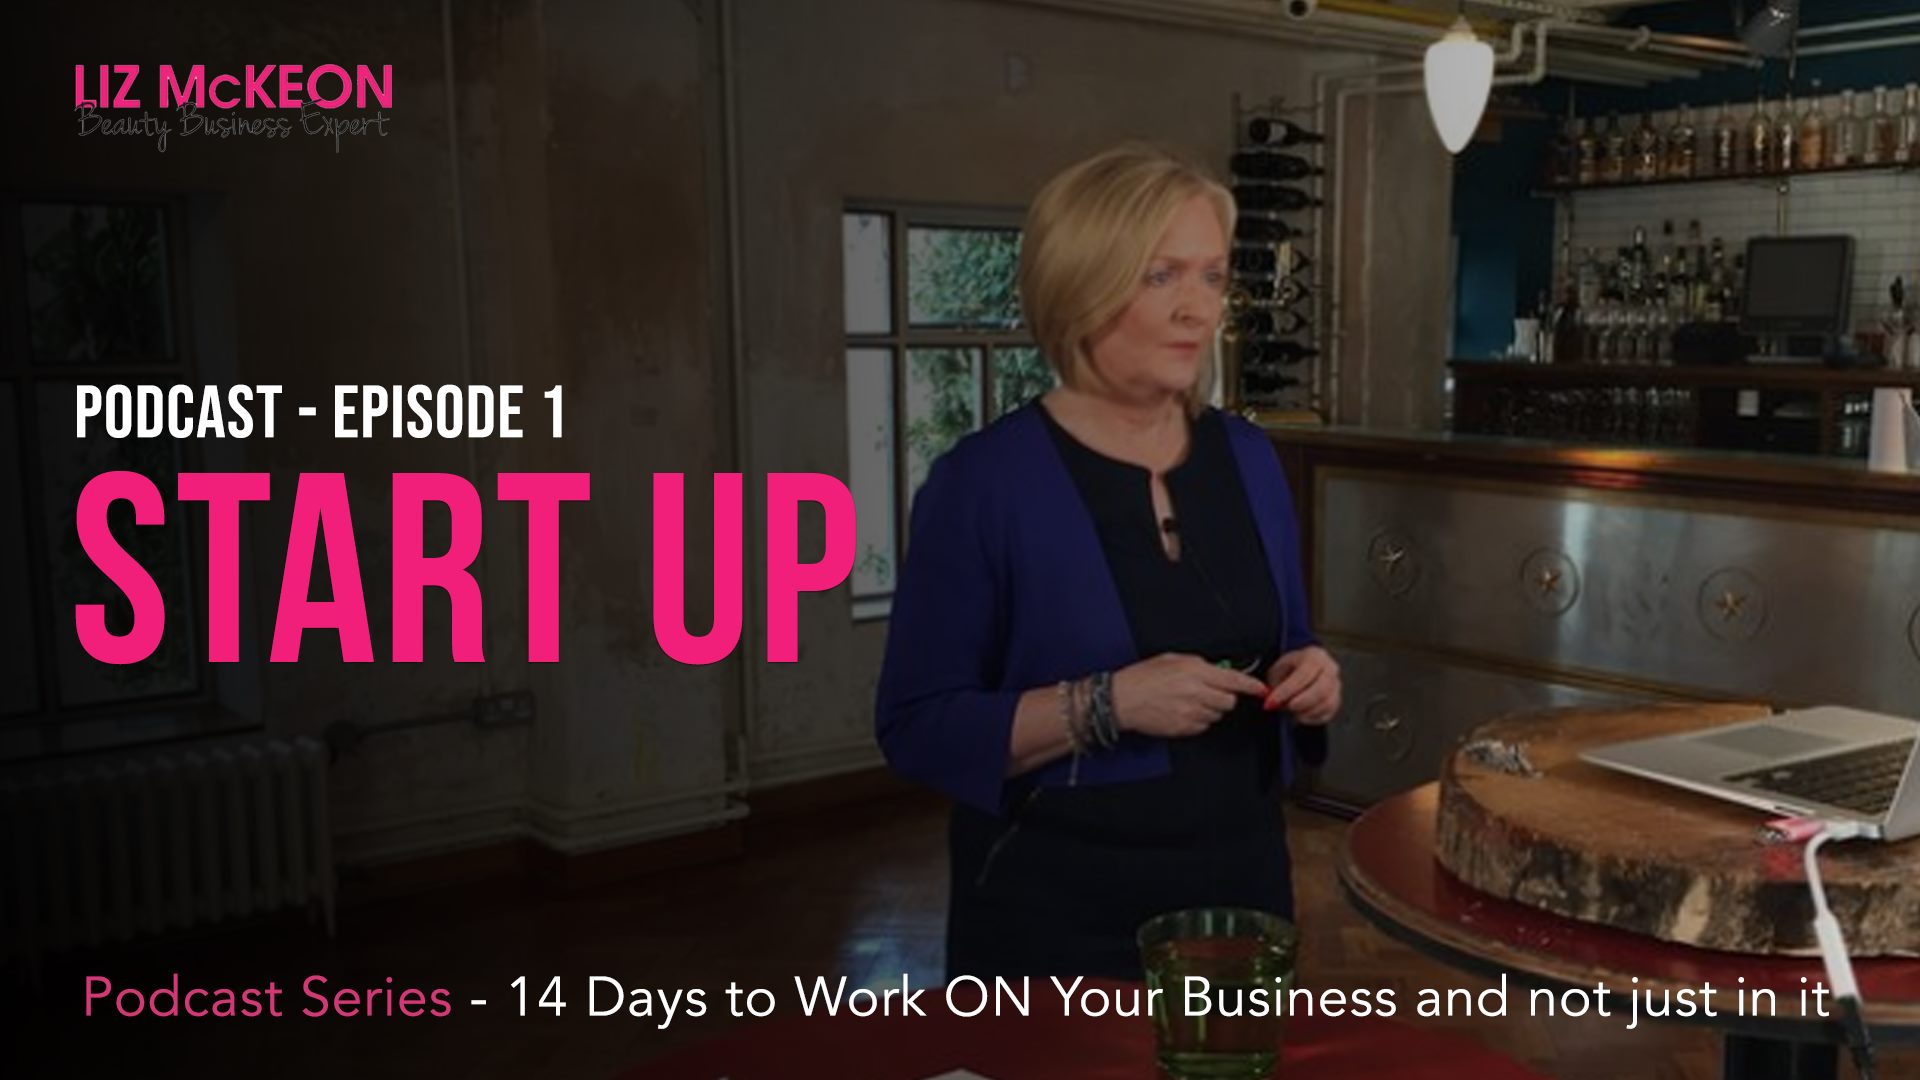 Liz McKeon 14 Days to Work on your Business Podcast